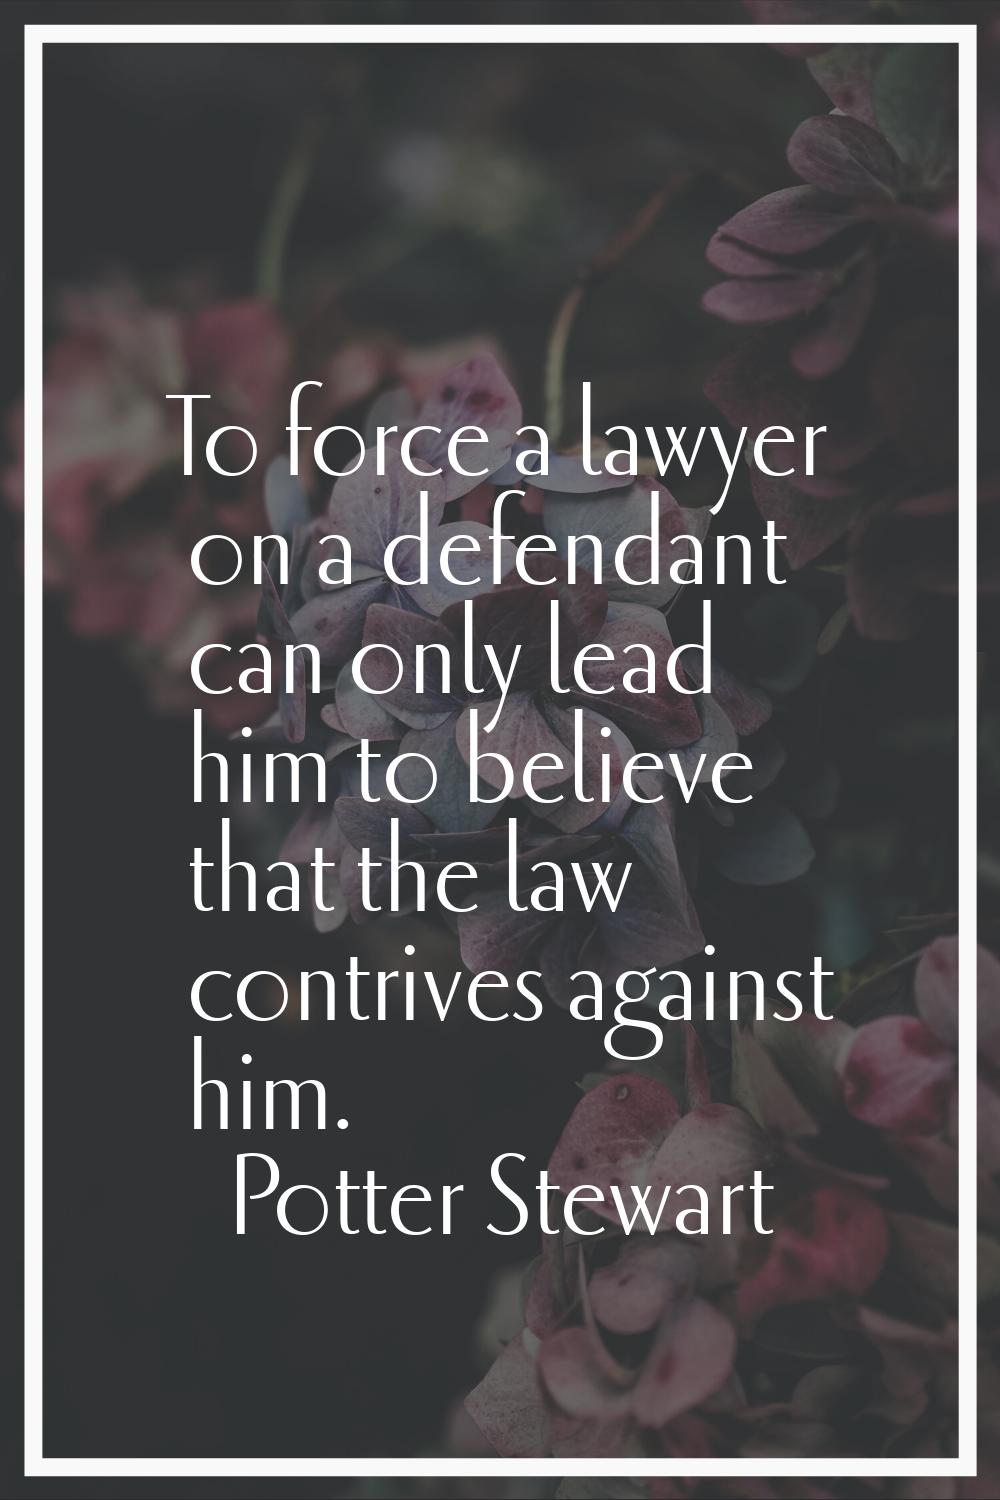 To force a lawyer on a defendant can only lead him to believe that the law contrives against him.